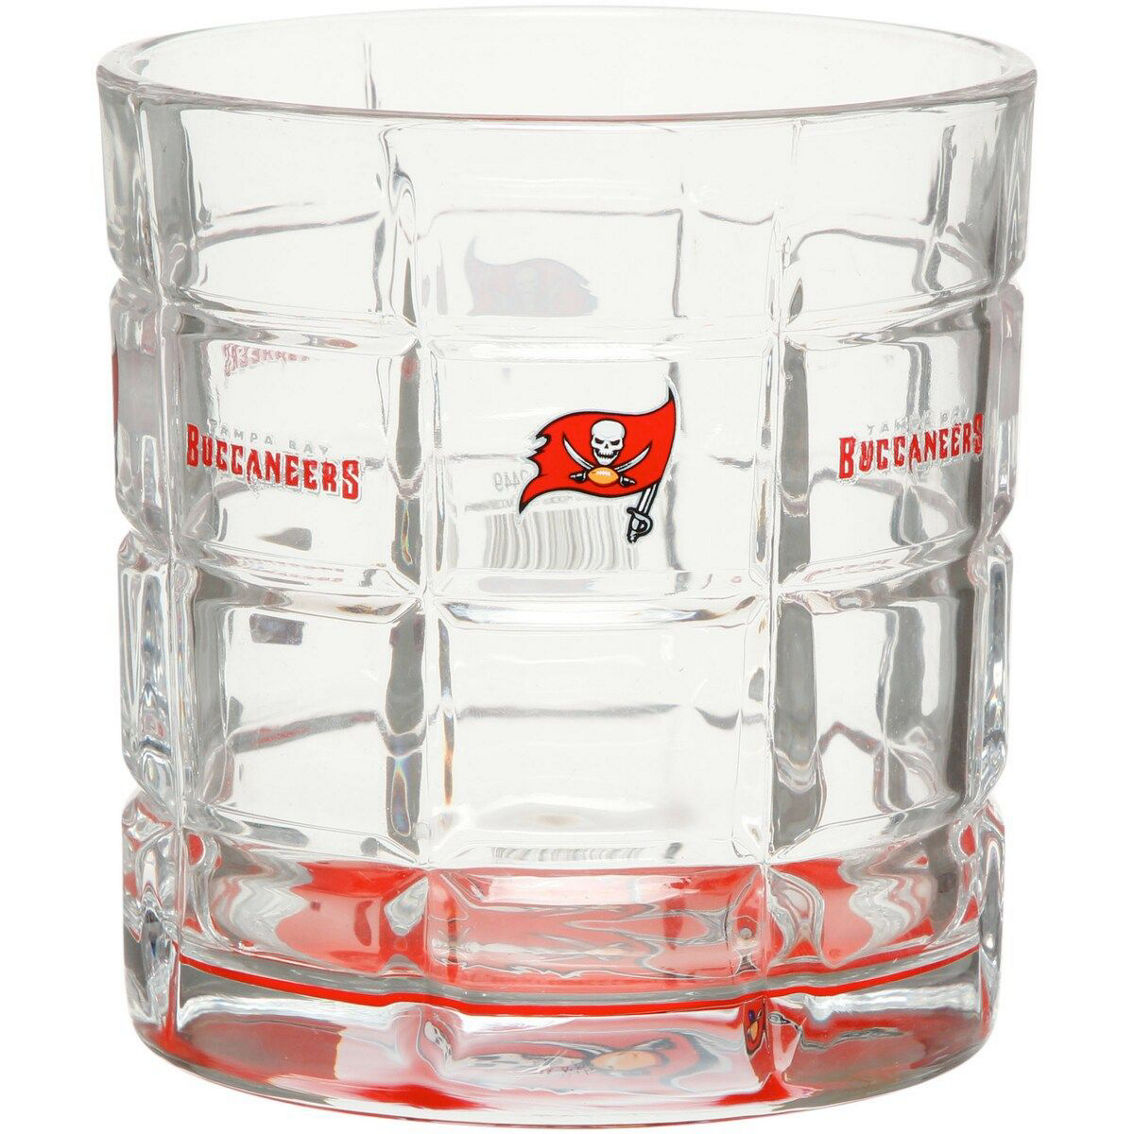 The Memory Company Tampa Bay Buccaneers 10oz. Bottoms Up Squared Rocks Glass - Image 2 of 2